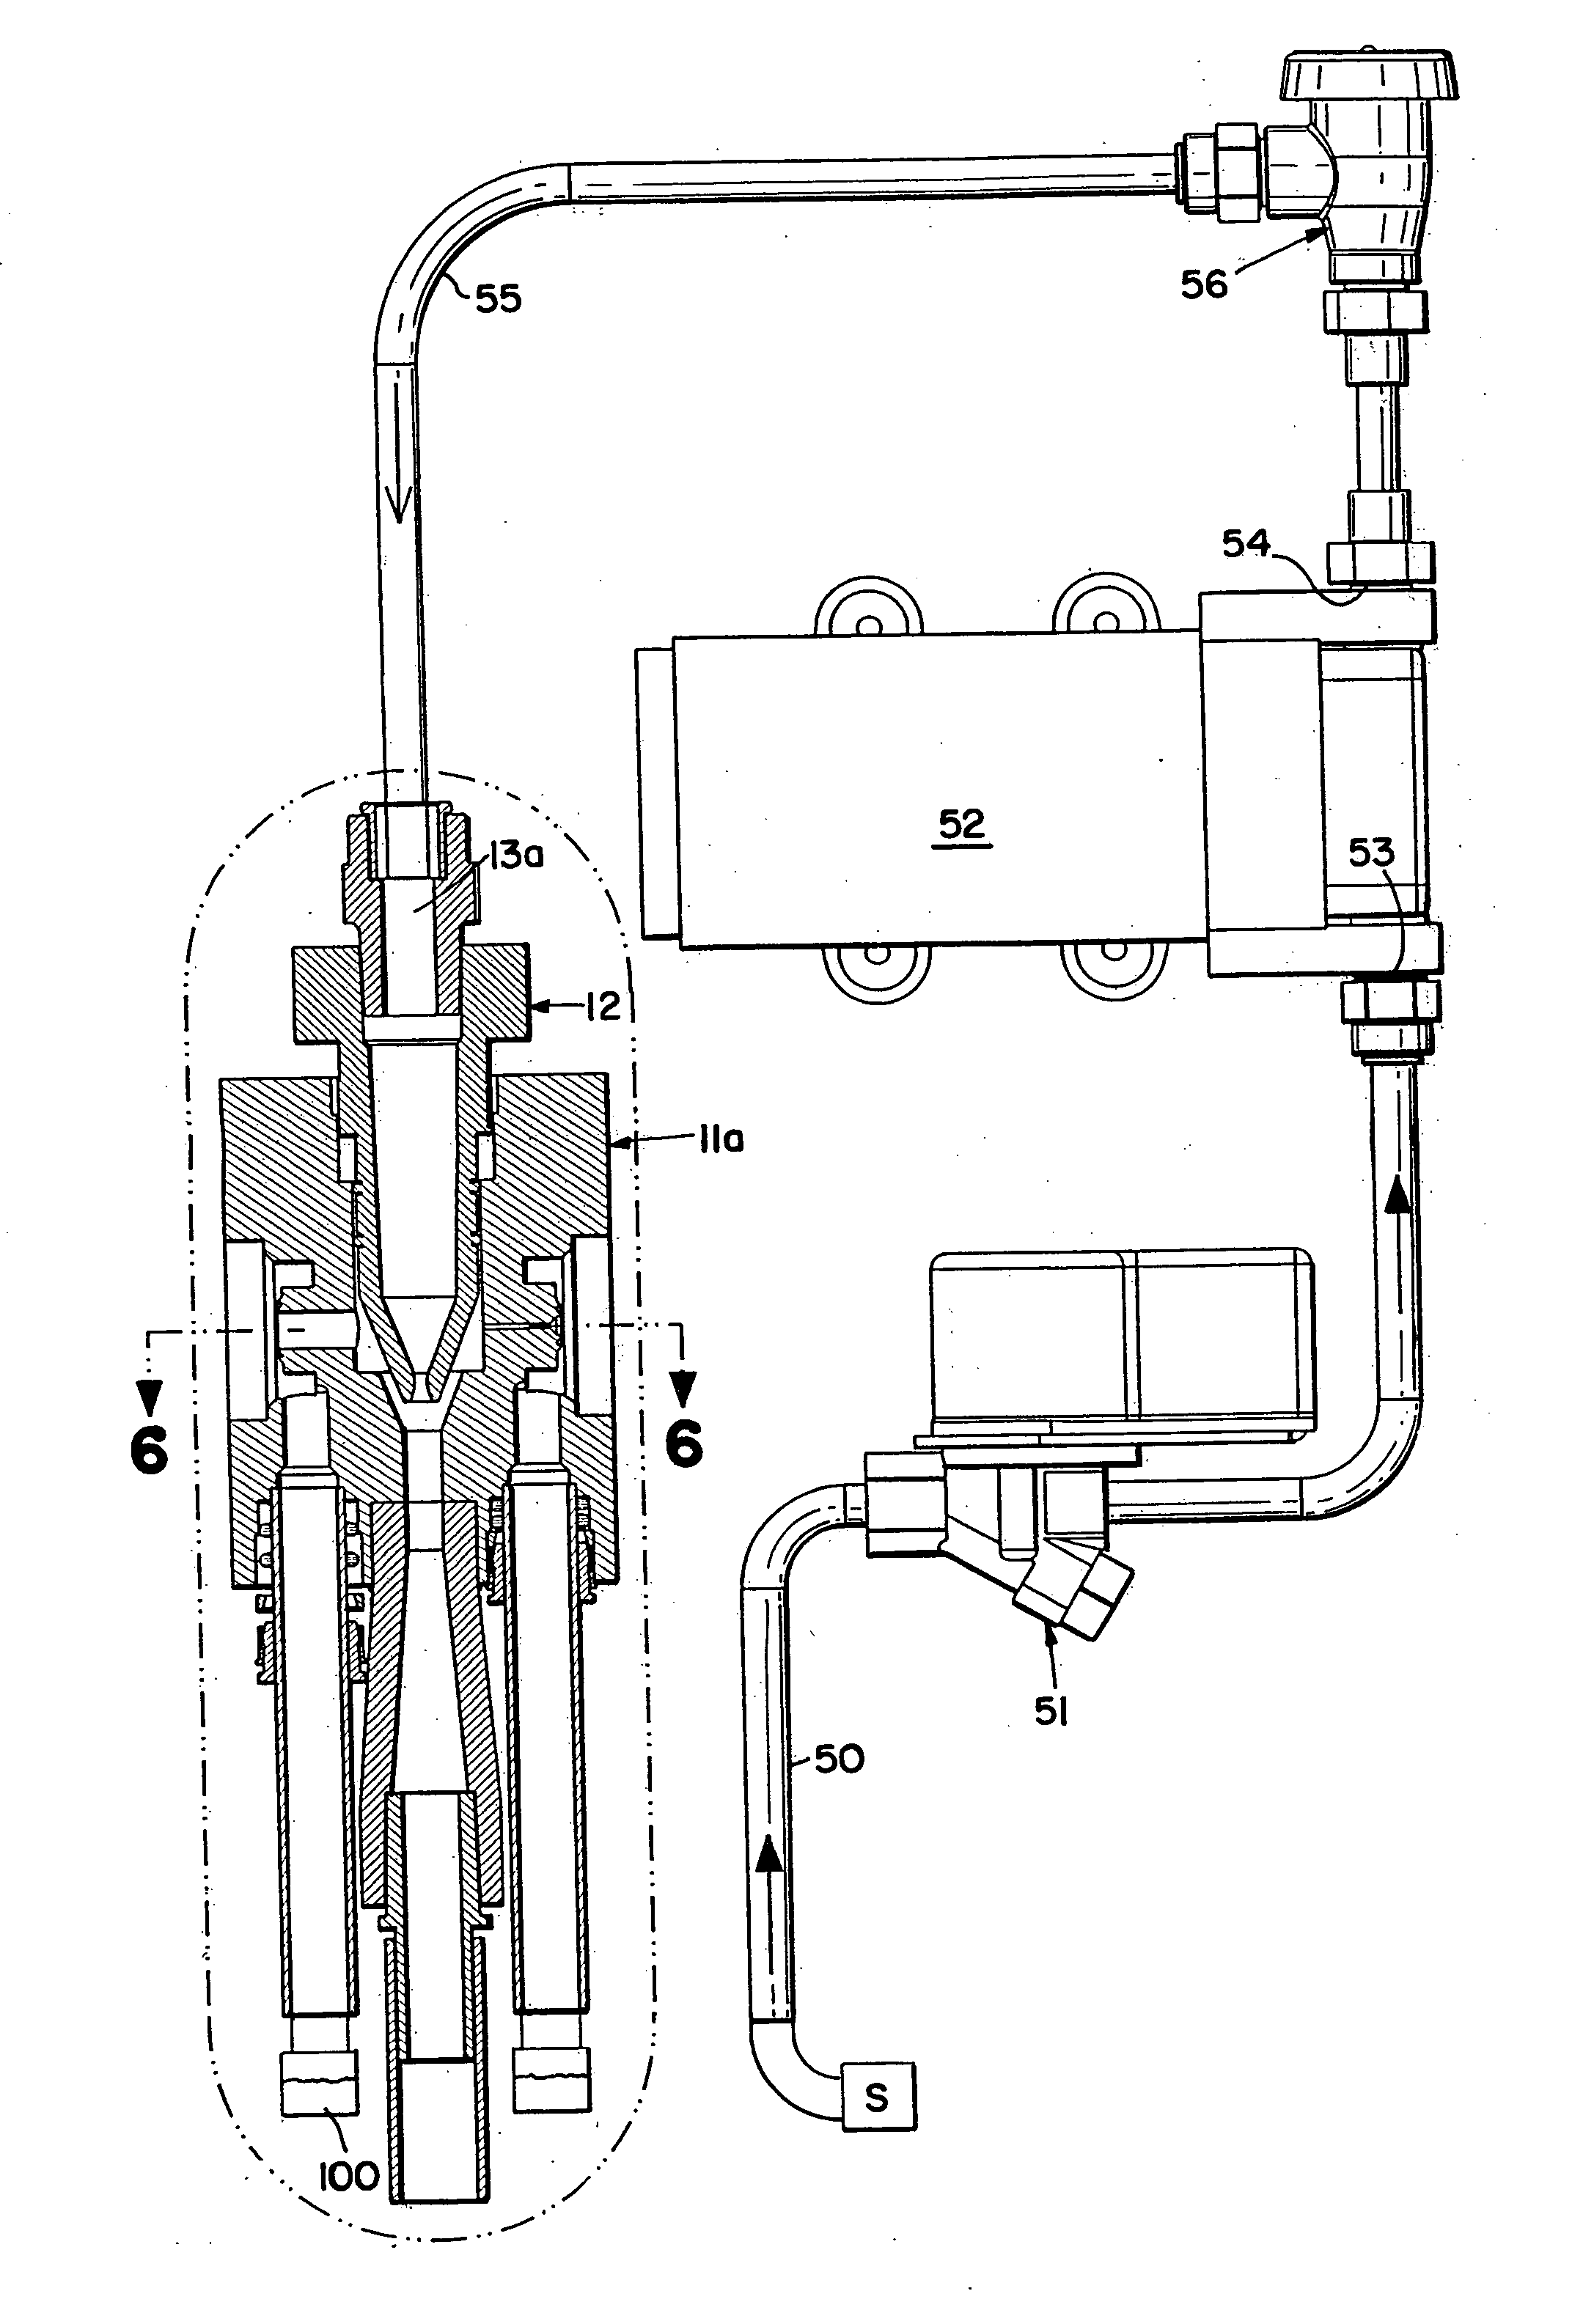 Method and apparatus for dispensing a use solution